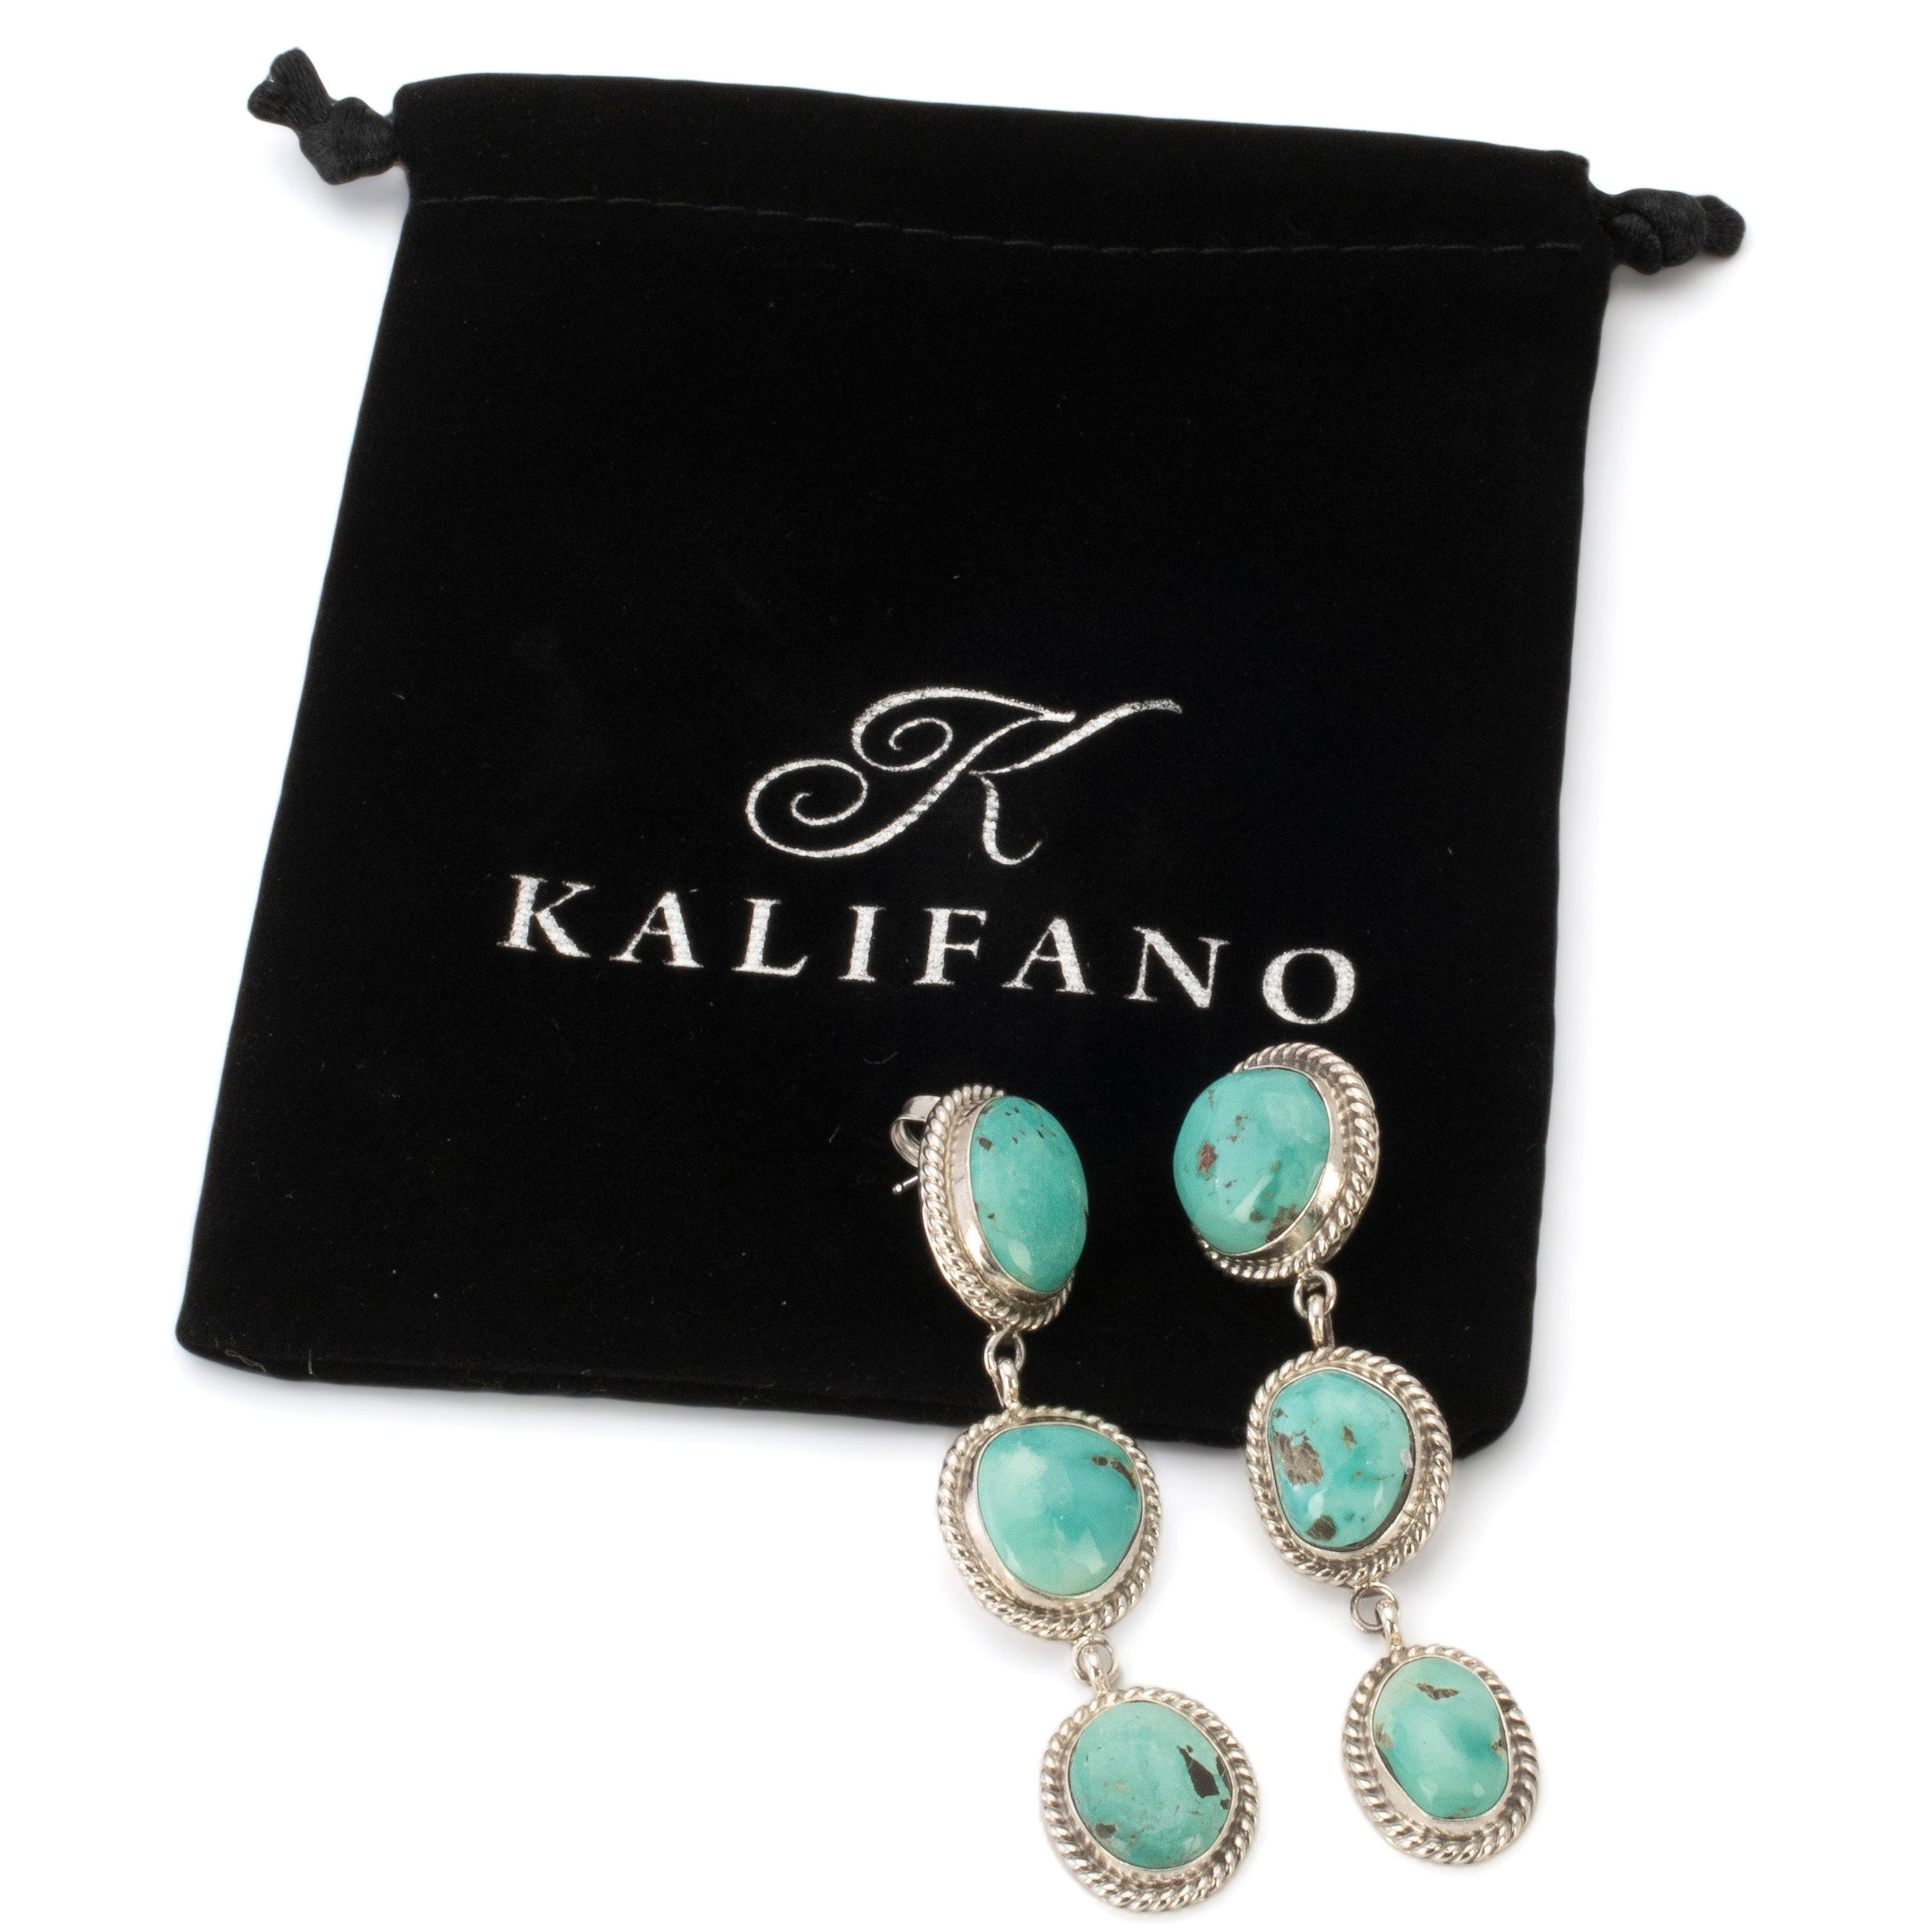 Kalifano Native American Jewelry Lucinda Linkin Navajo Carico Lake Turquoise Triple Stone USA Native American Made 925 Sterling Silver Earrings with Stud Backing NAE1000.006